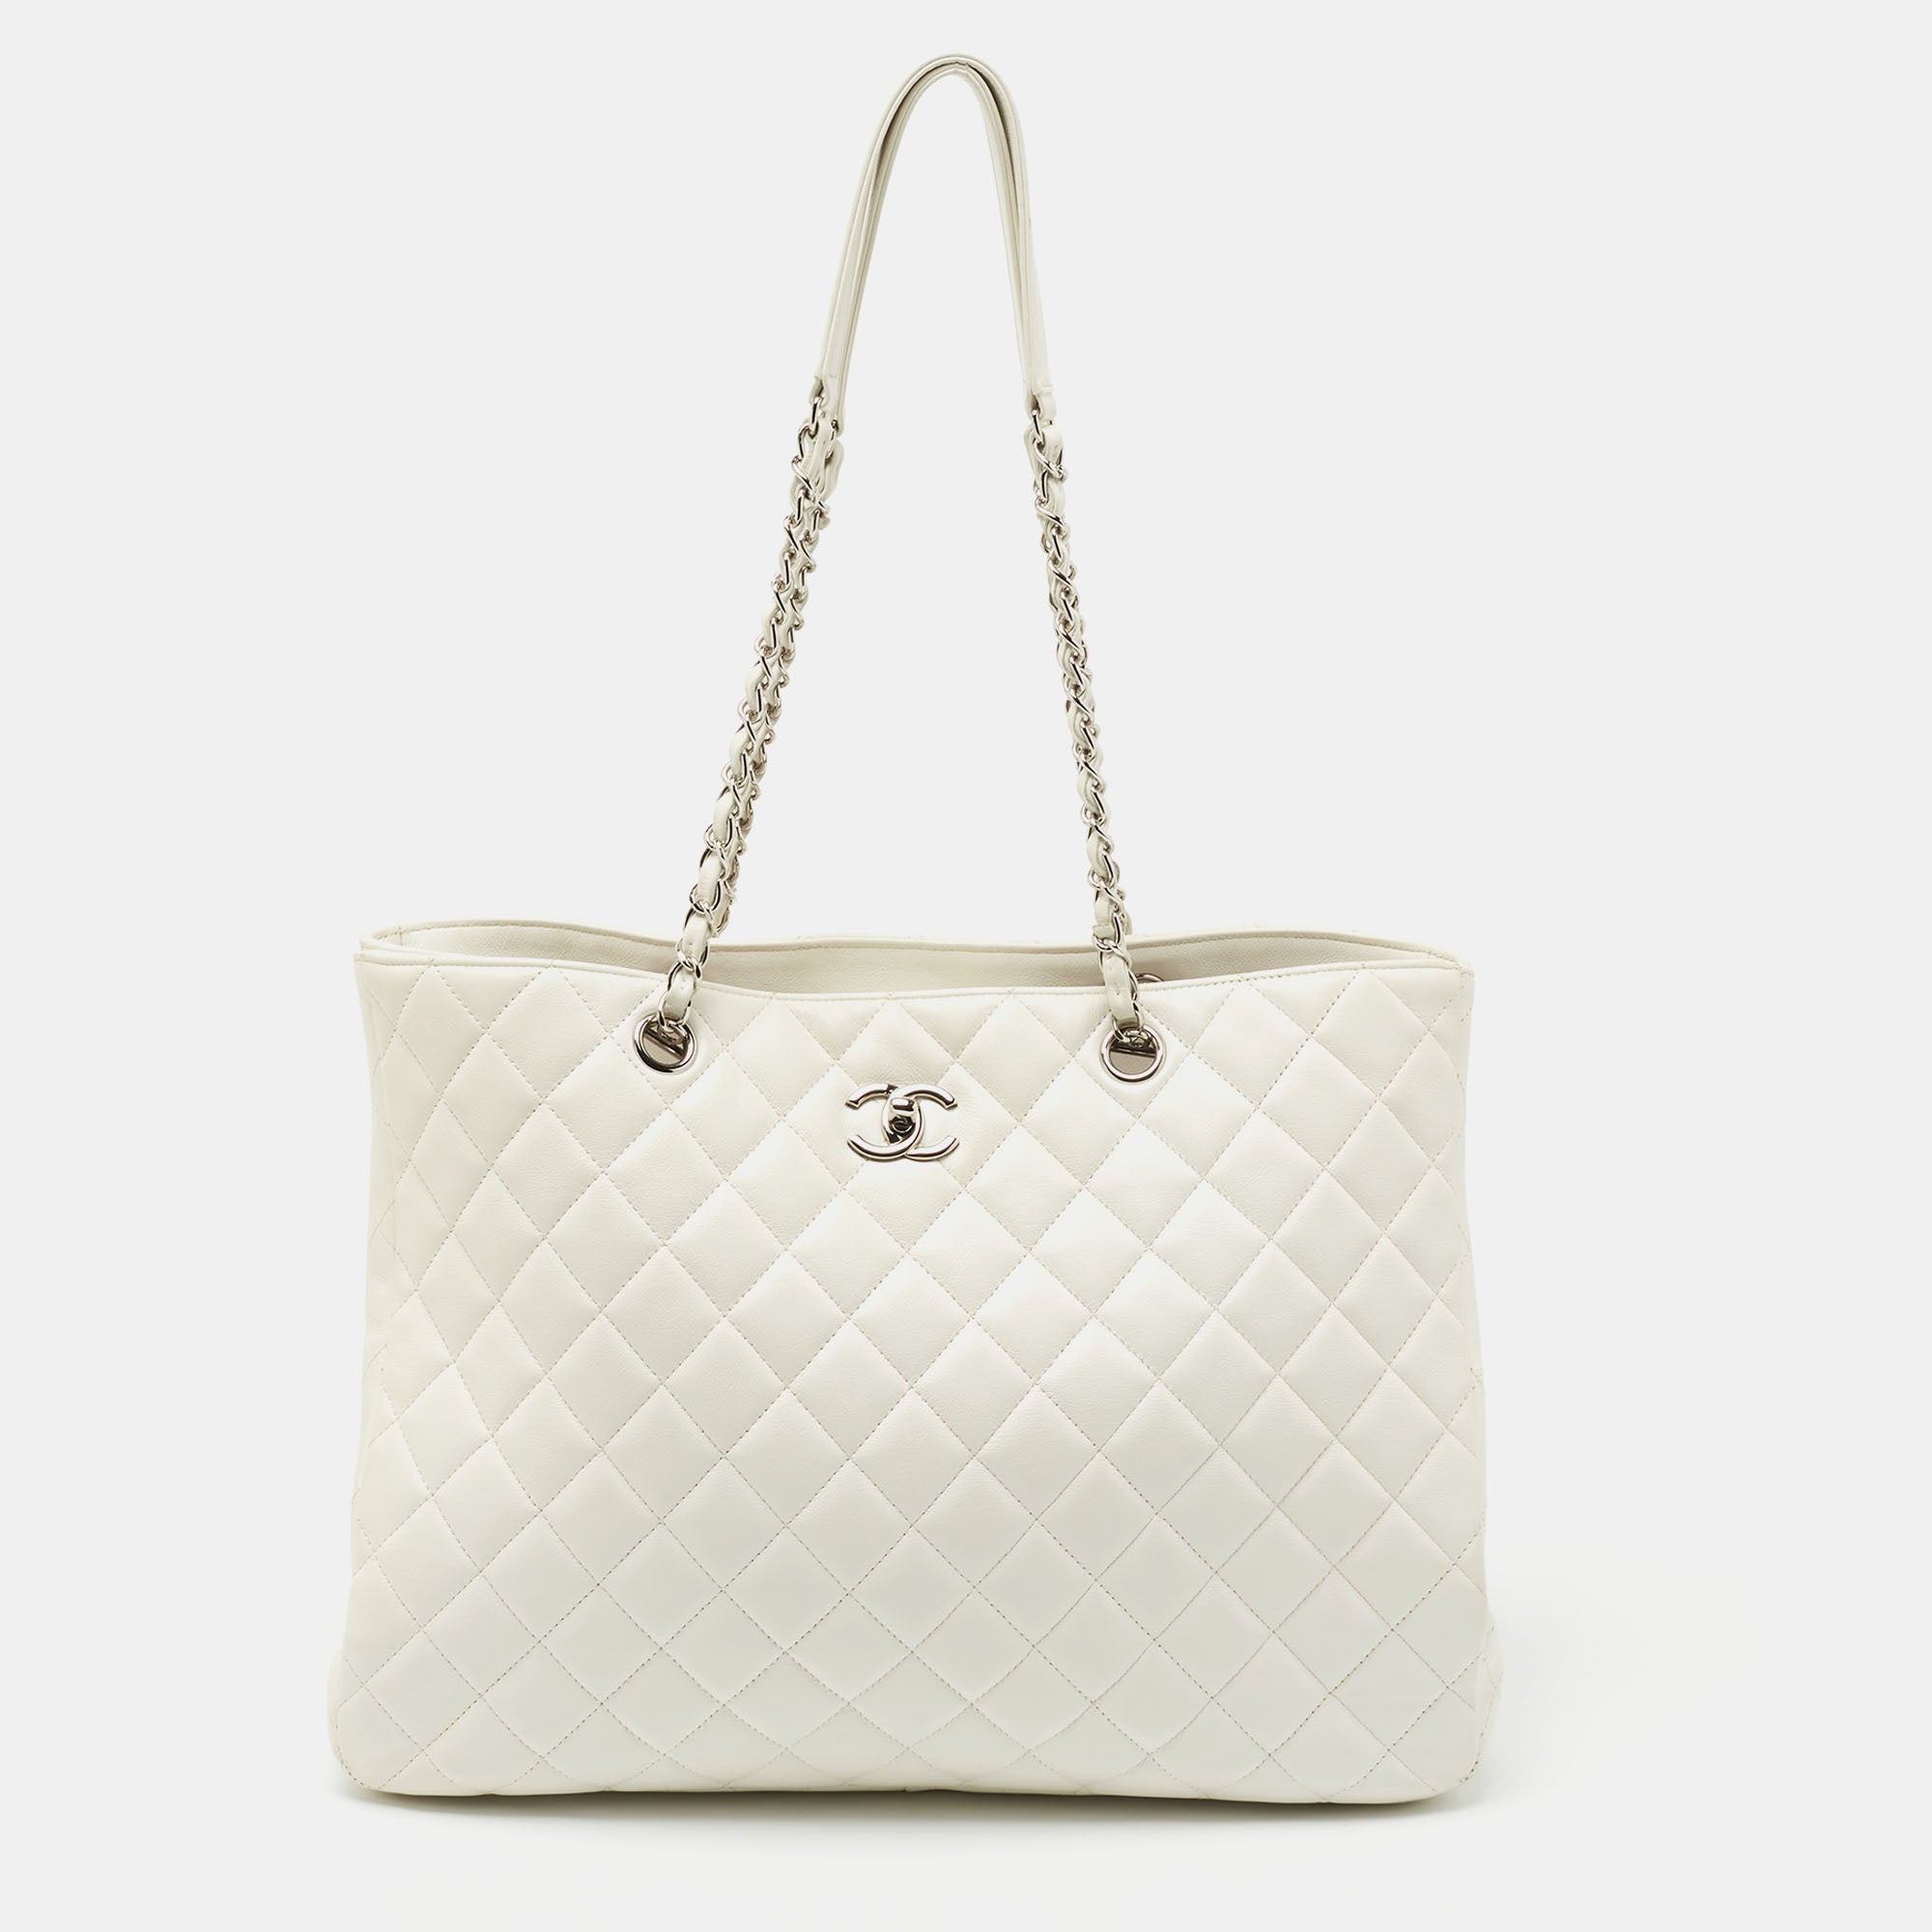 Chanel White Quilted Leather CC Classic Shopper Tote